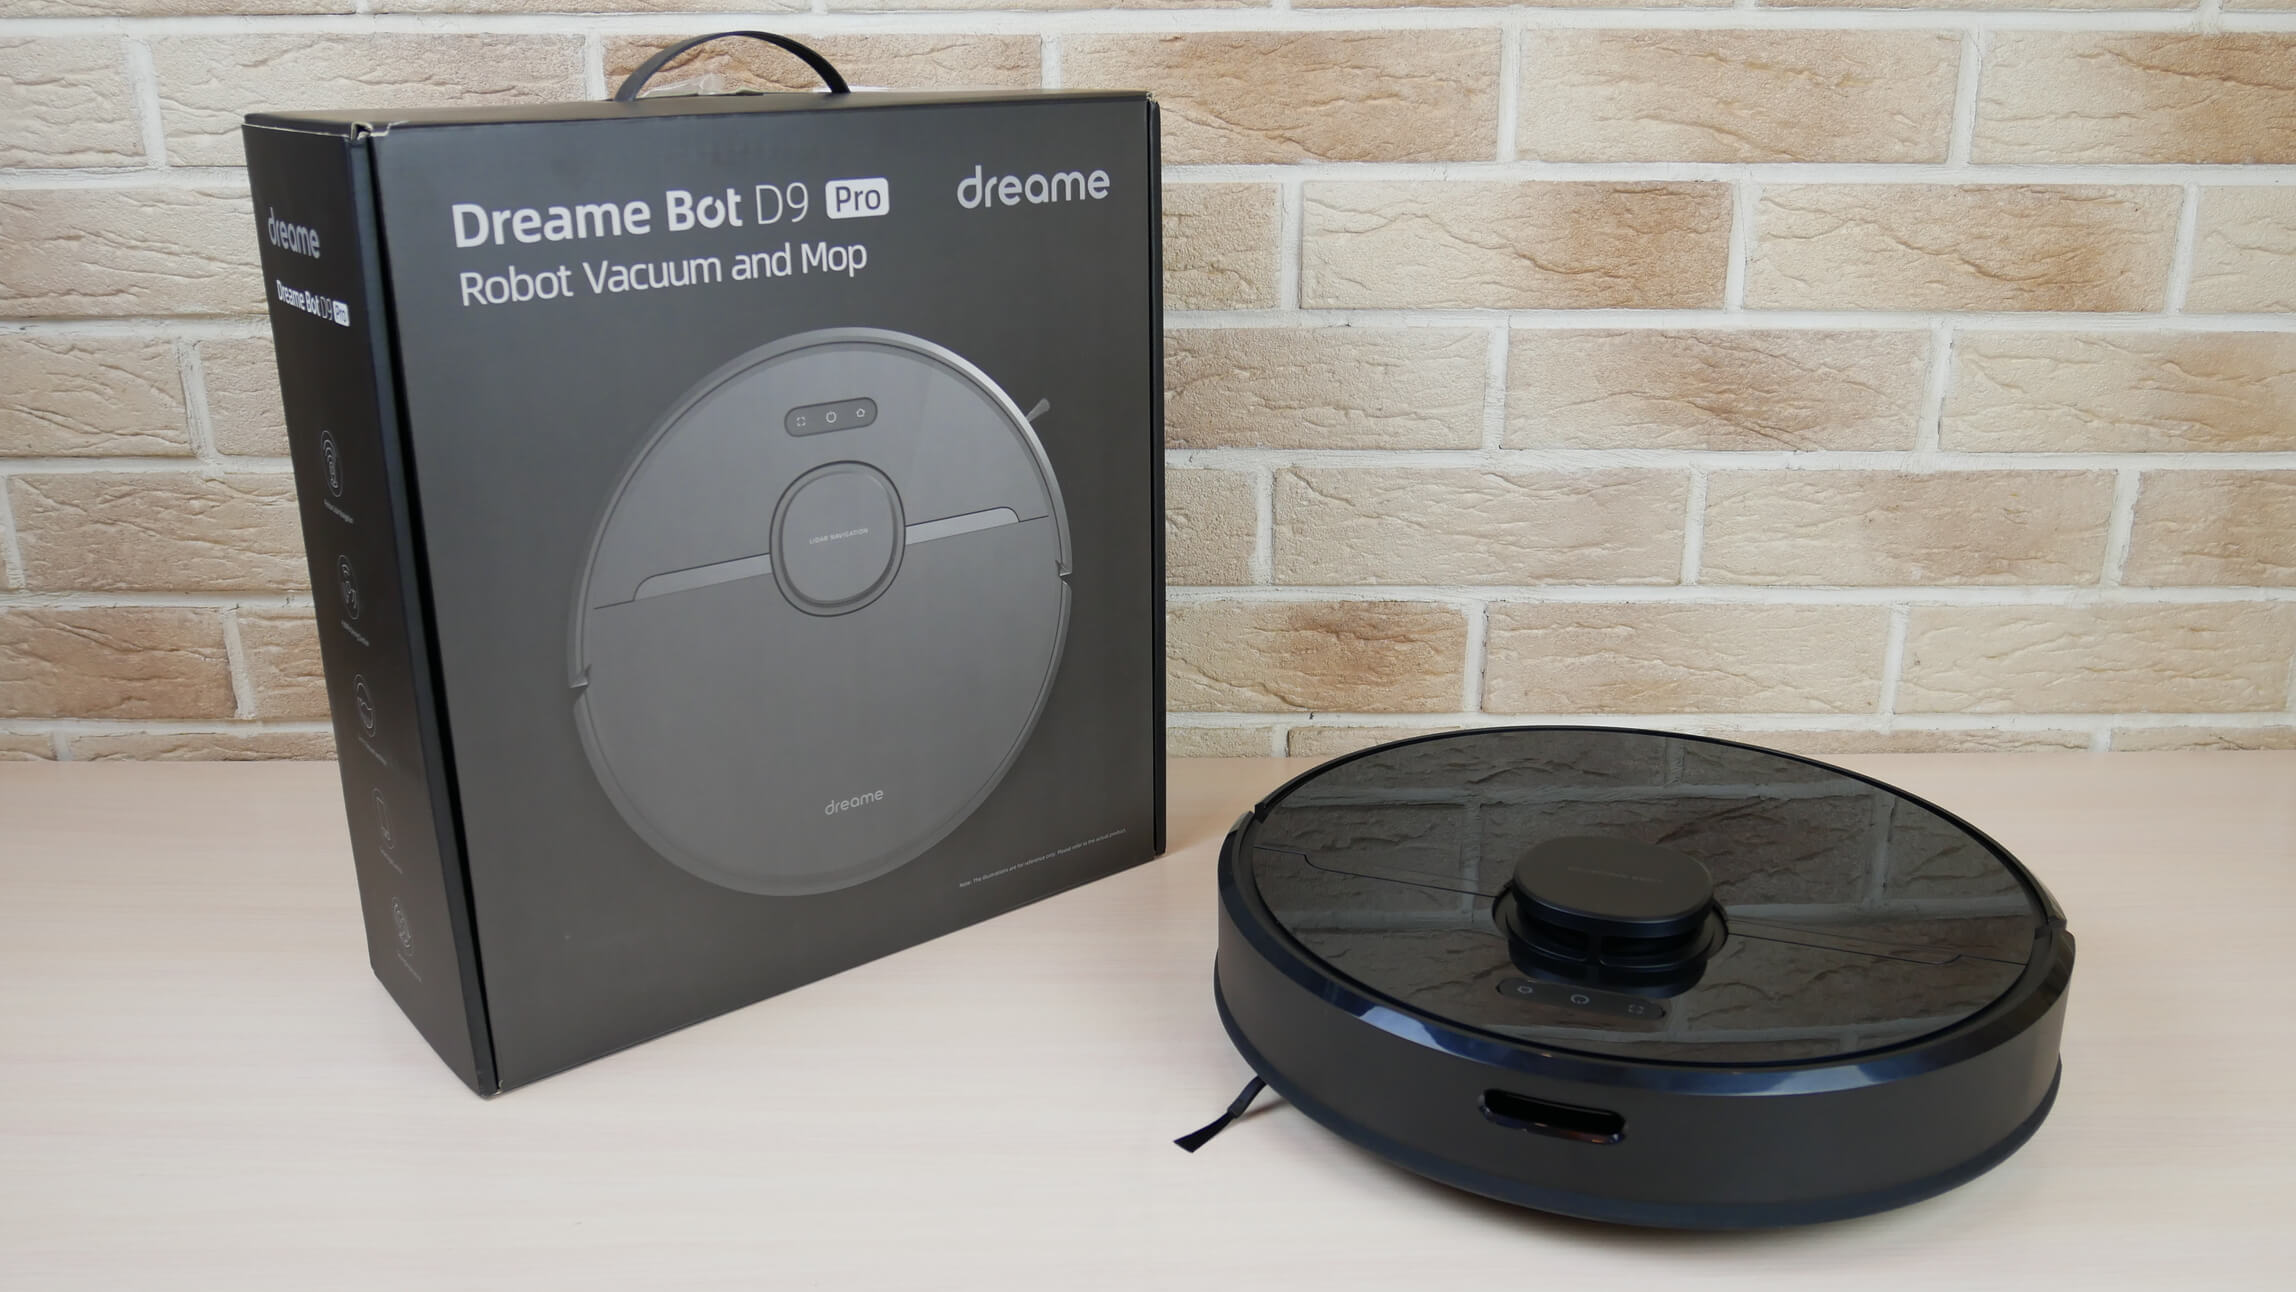 Dreame Bot D9 Pro: review and comparison with Dreame Bot D9 Max